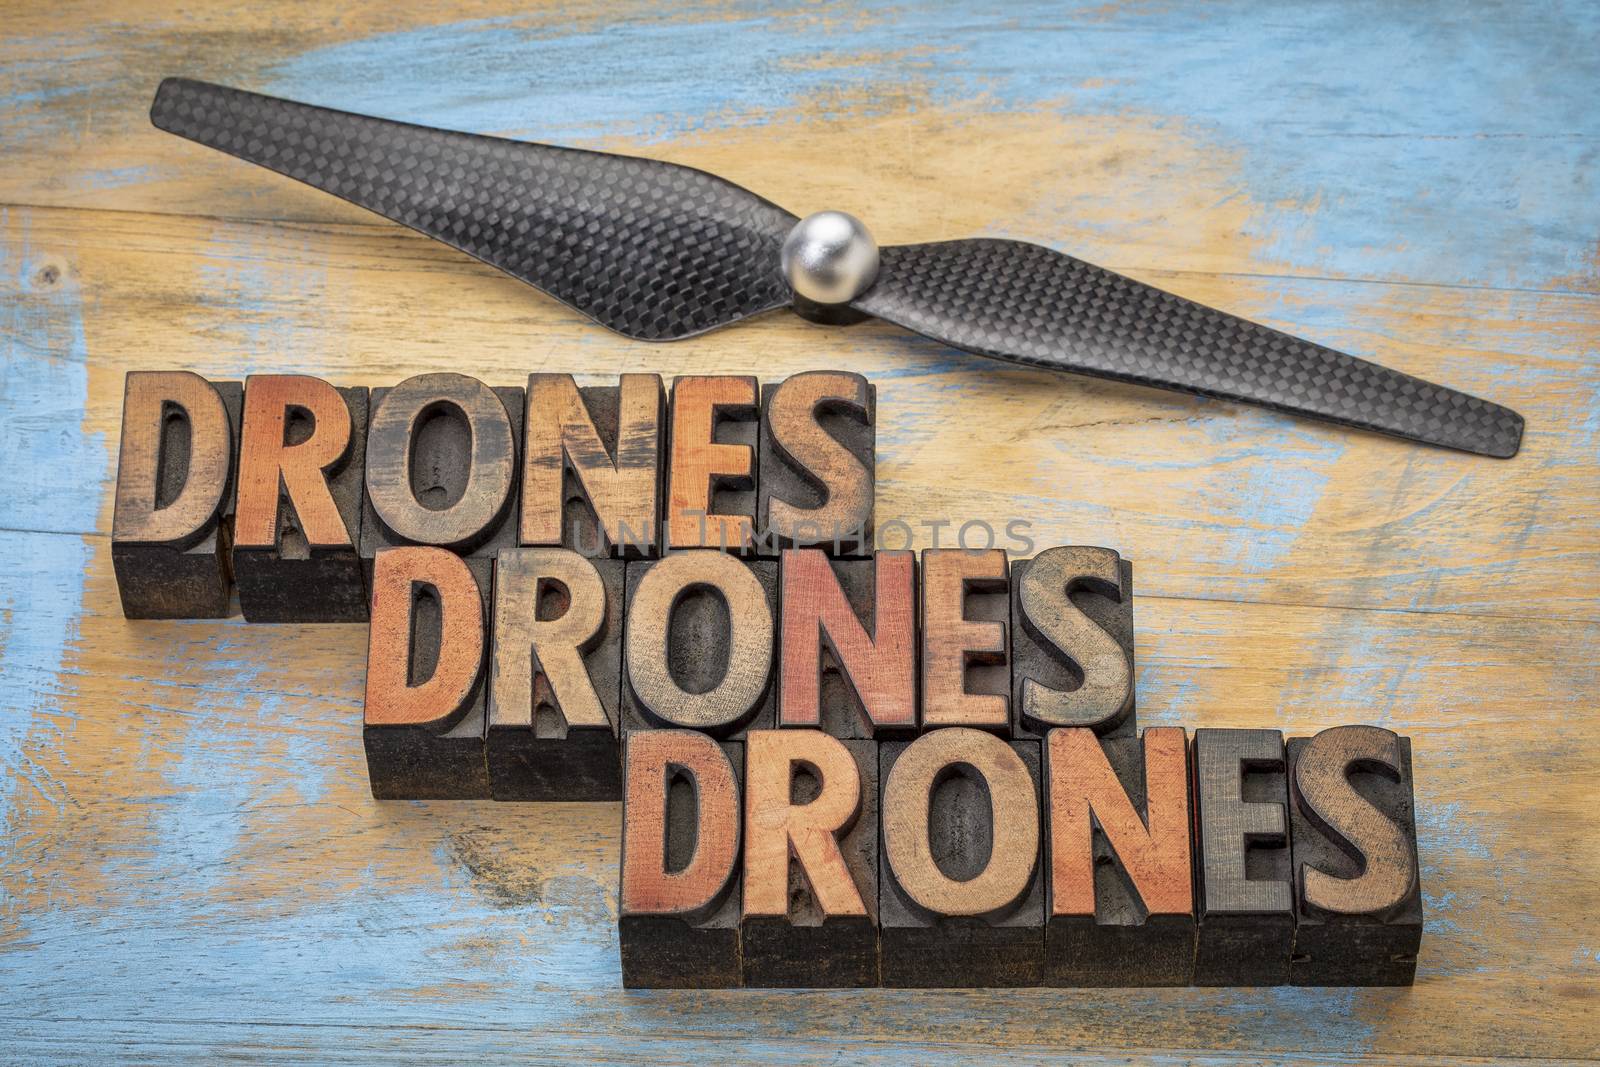 drones word abstract in vintage letterpress  wood type with a drone propeller - new aircraft technology concept